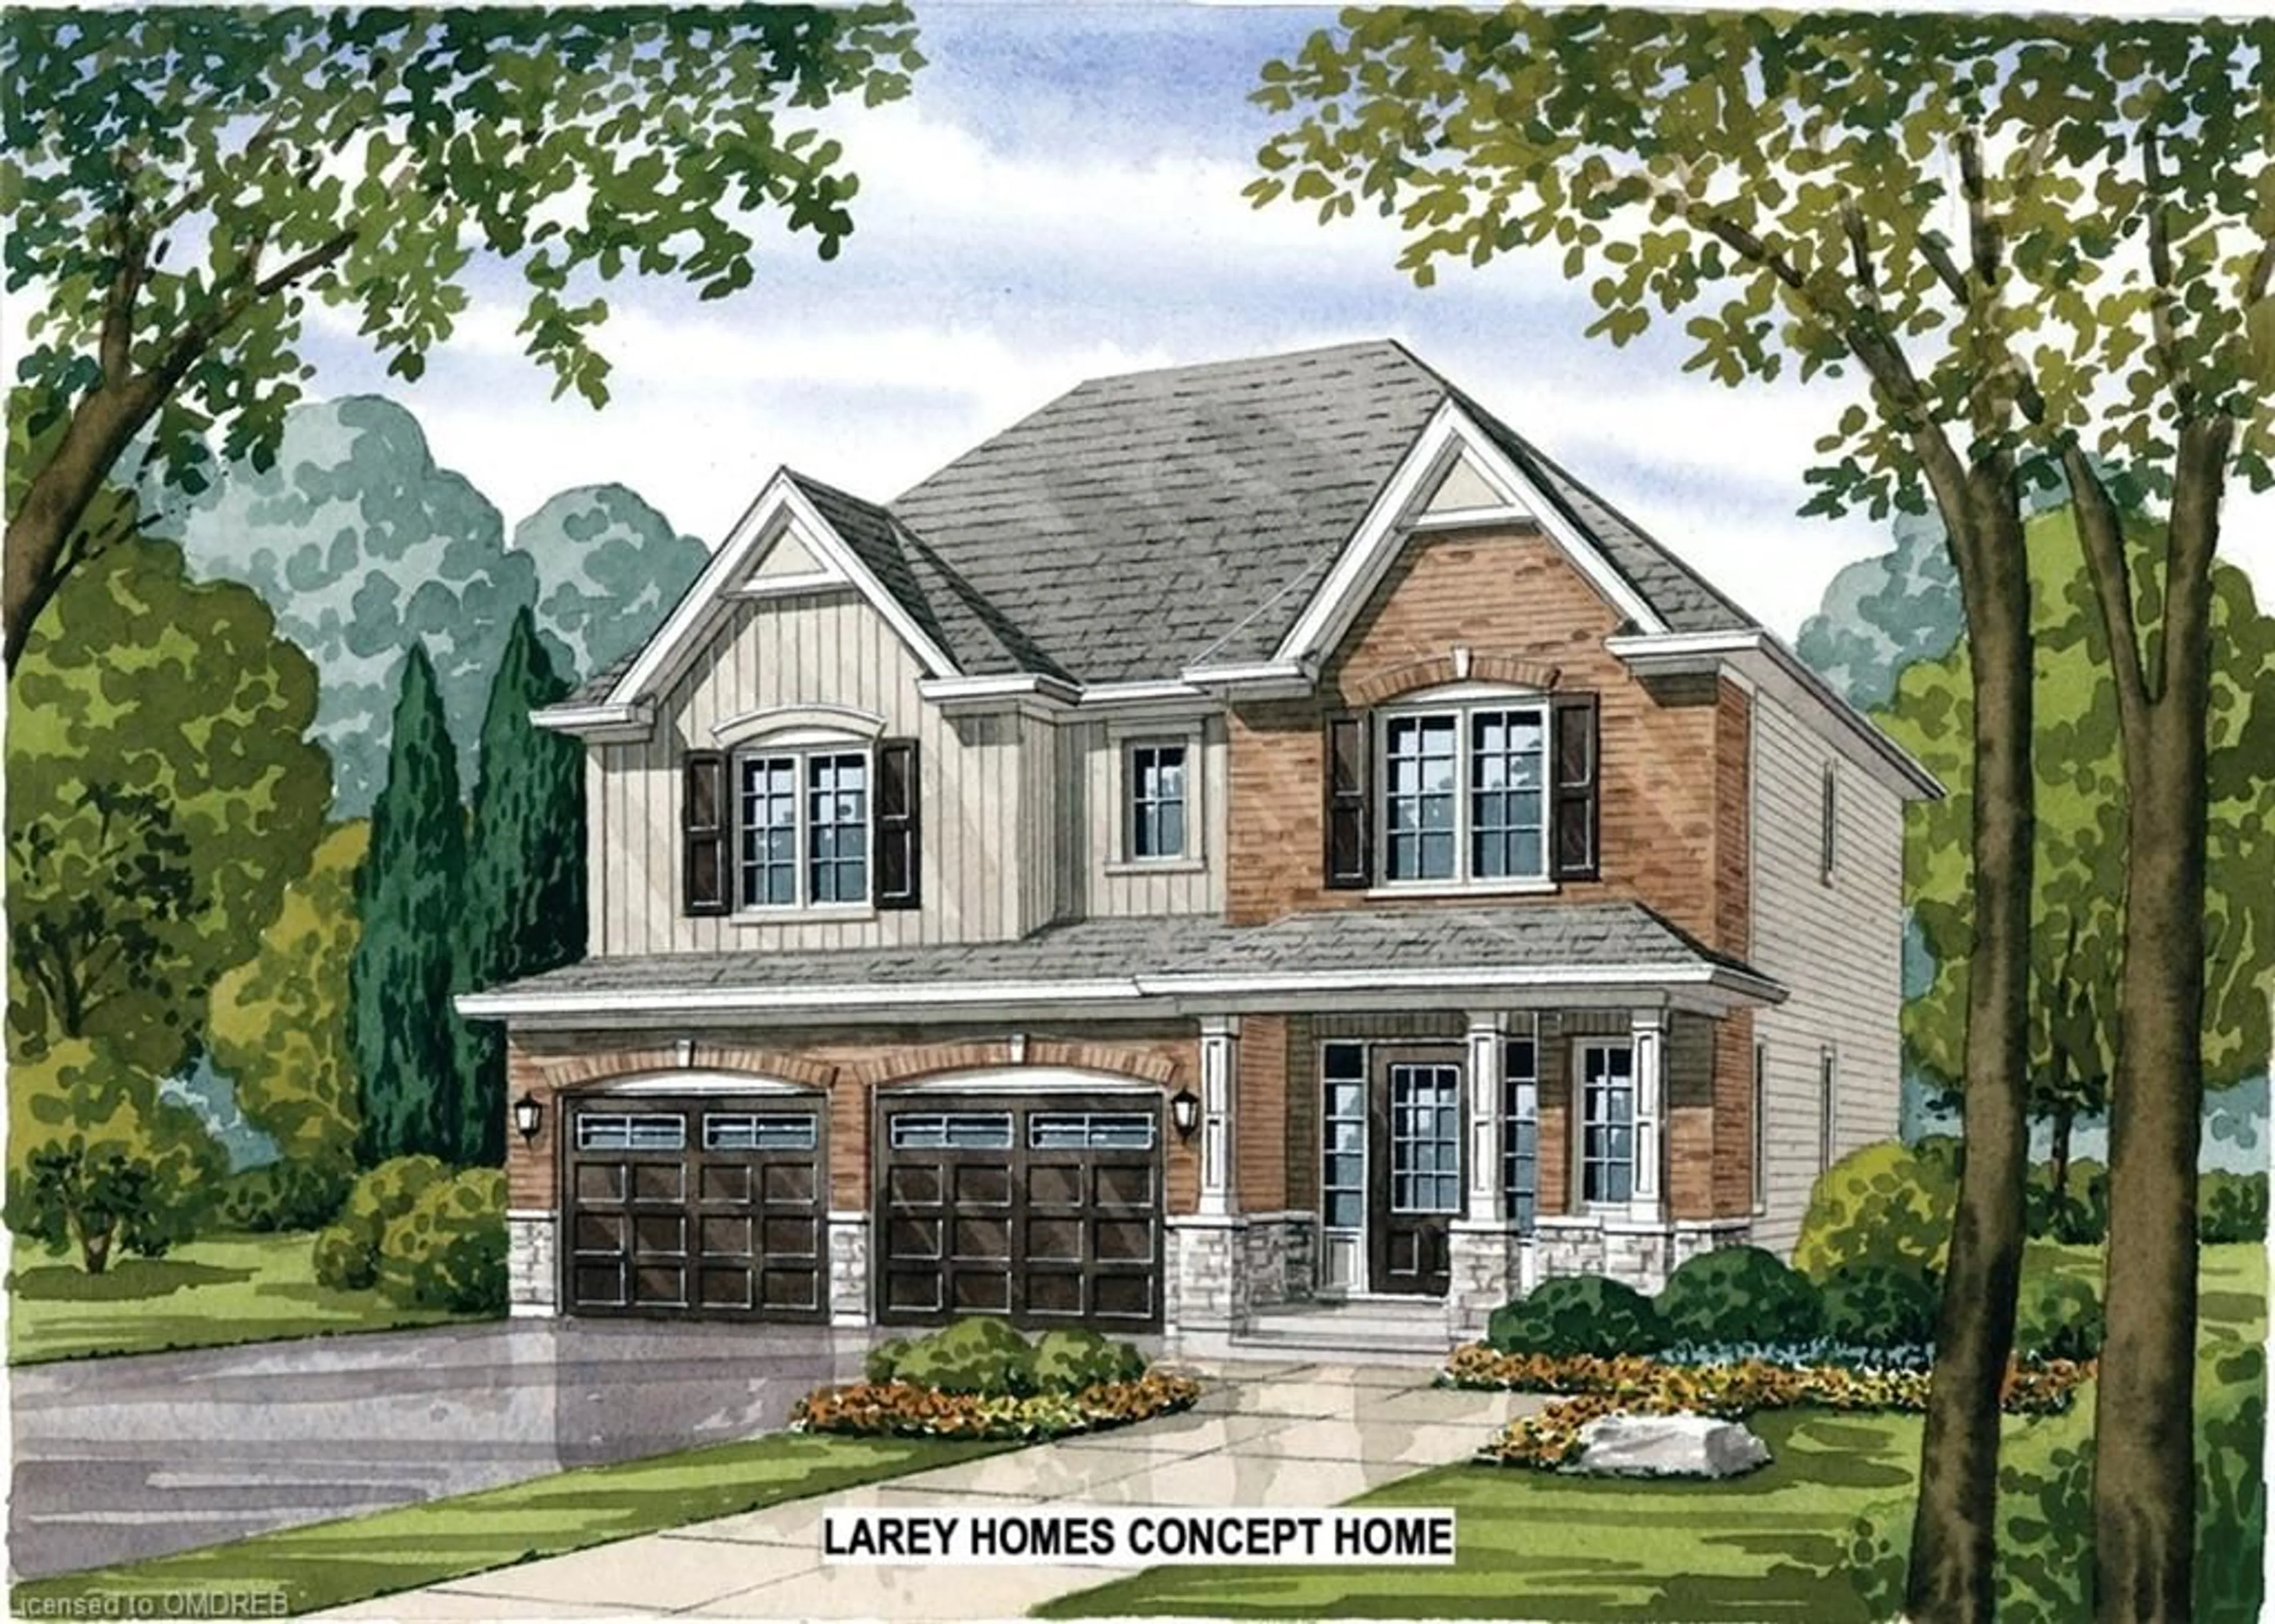 Home with brick exterior material for 37 Victoria Ave #18, Acton Ontario L7J 1Z1